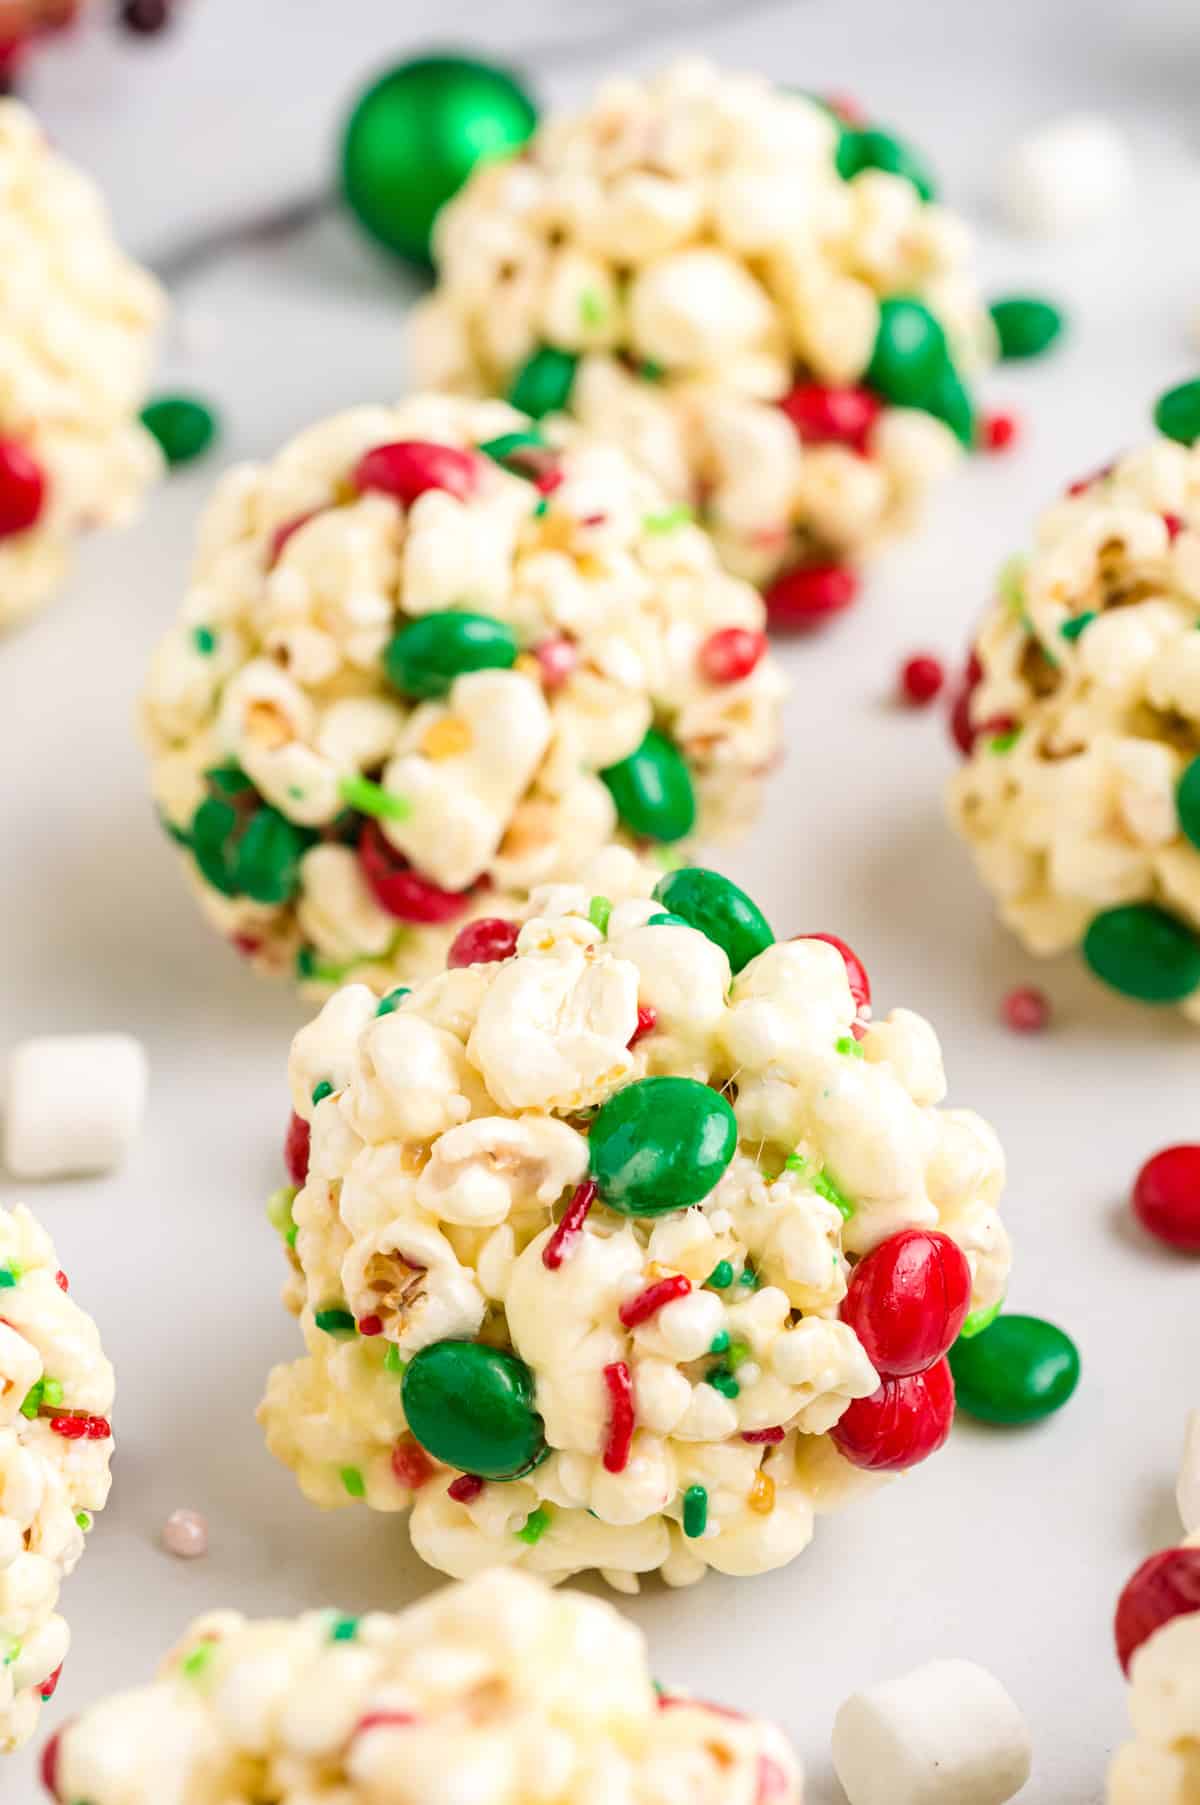 Popcorn balls with m&ms and sprinkles